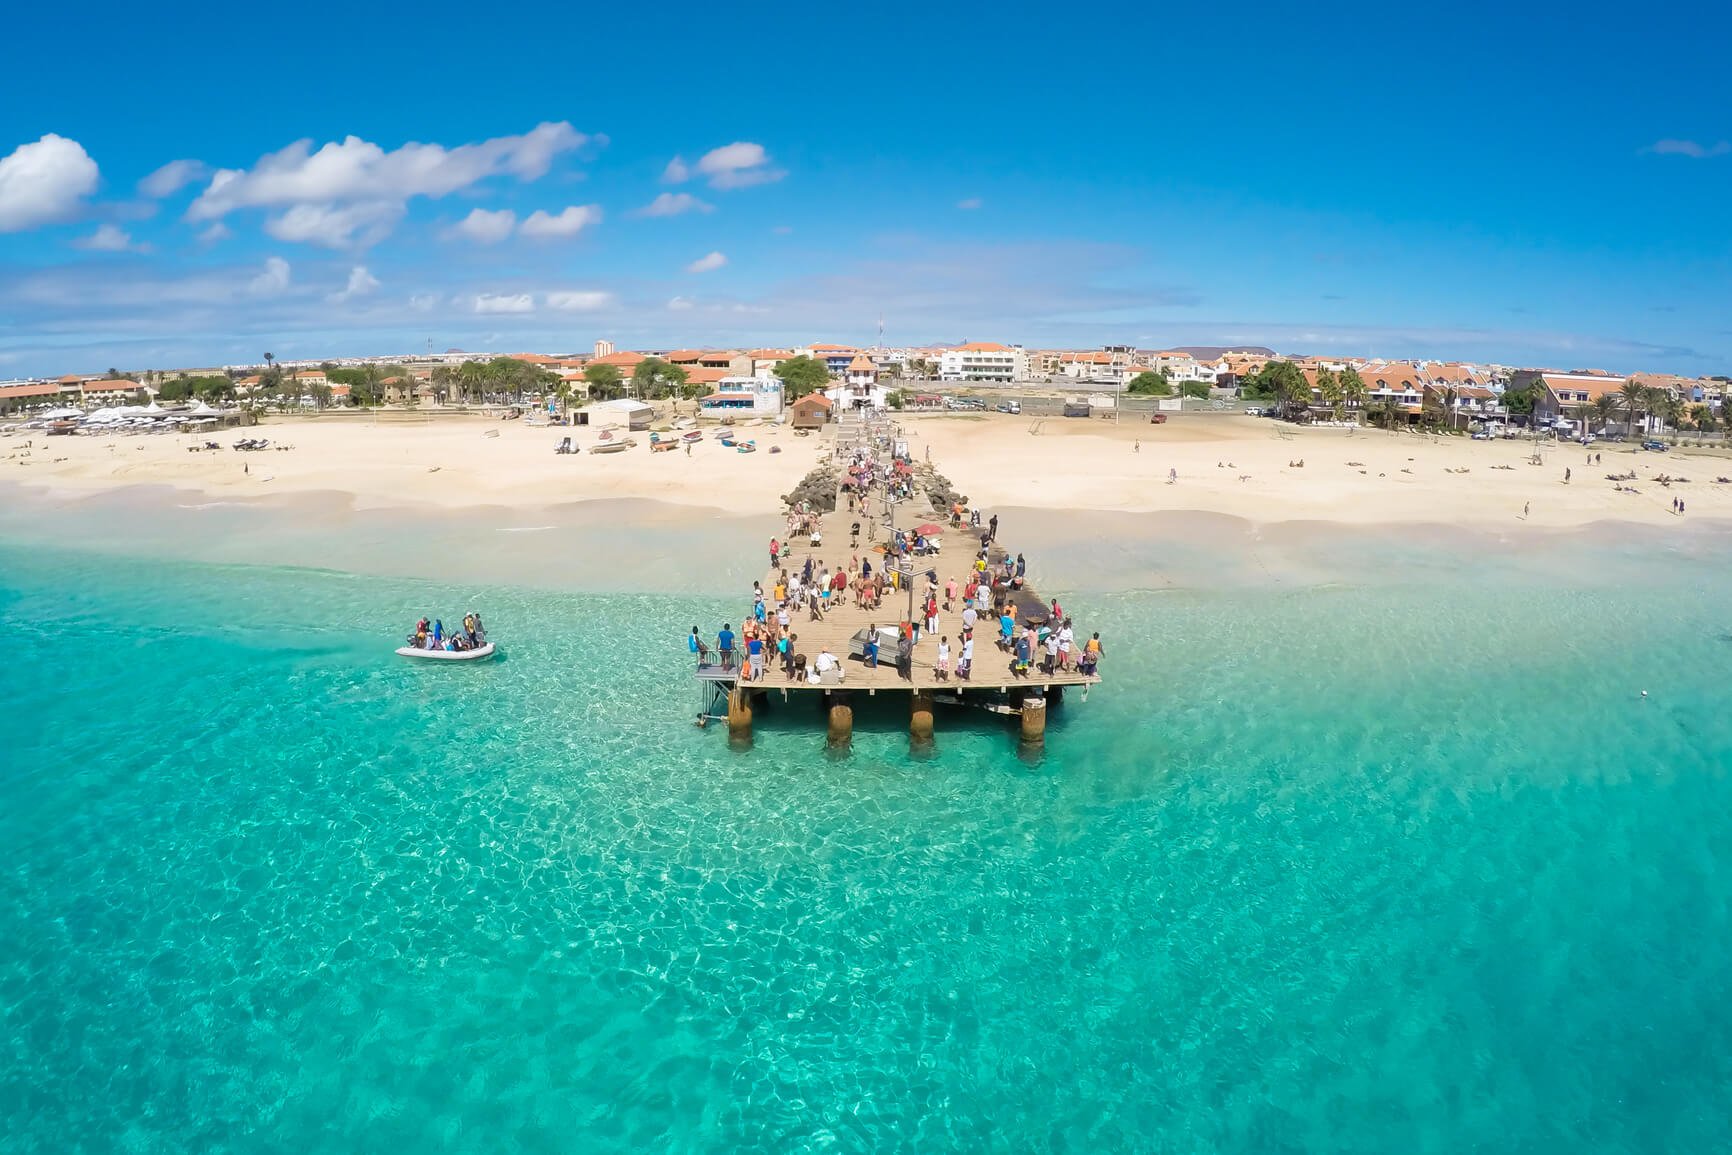 Amsterdam, Netherlands to Cape Verde for only €258 roundtrip